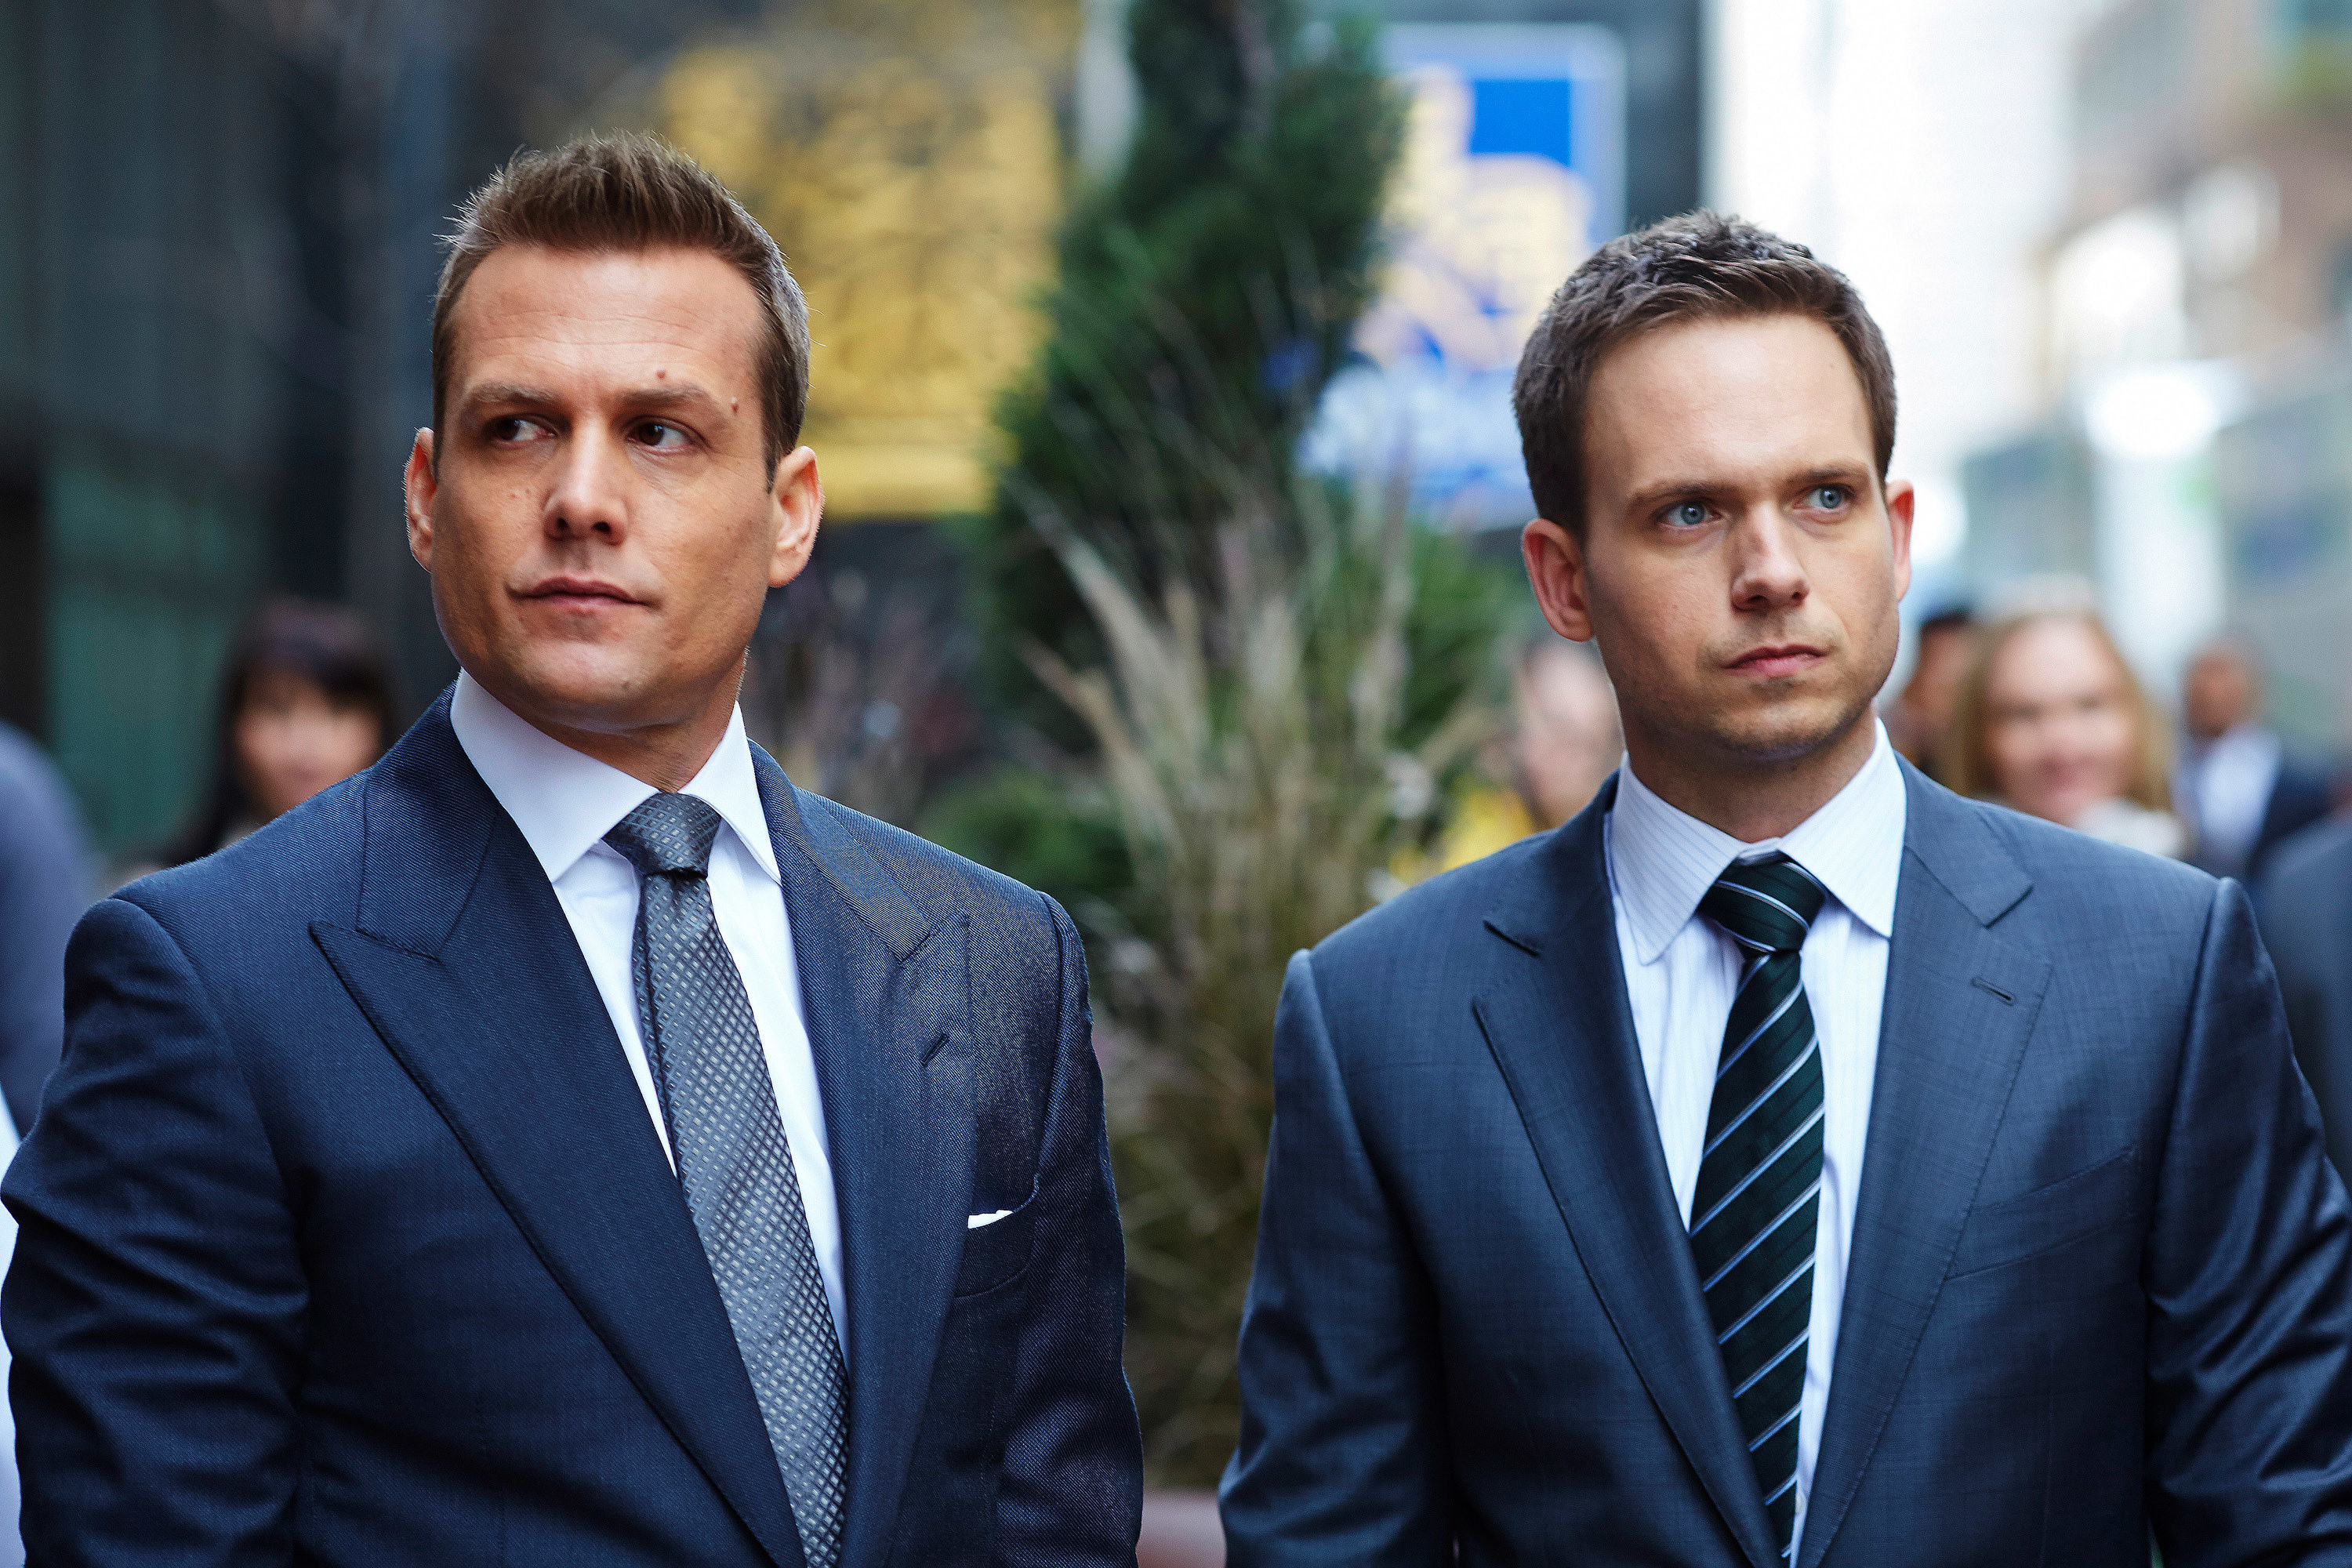 Gabriel Macht and Patrick J. Adams outside in the street